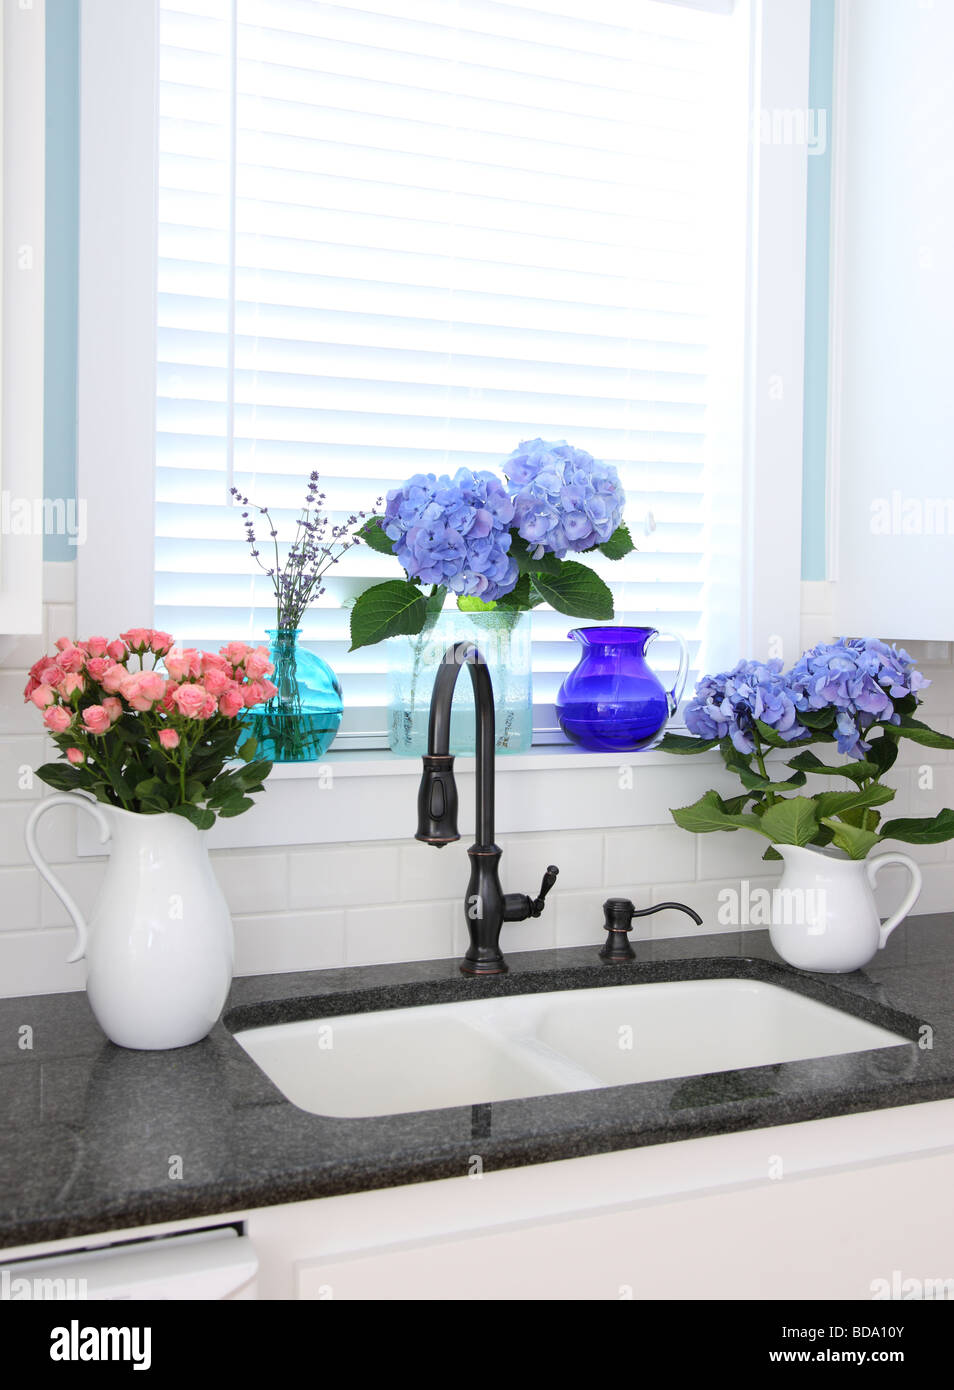 Kitchen sink with flowers Stock Photo